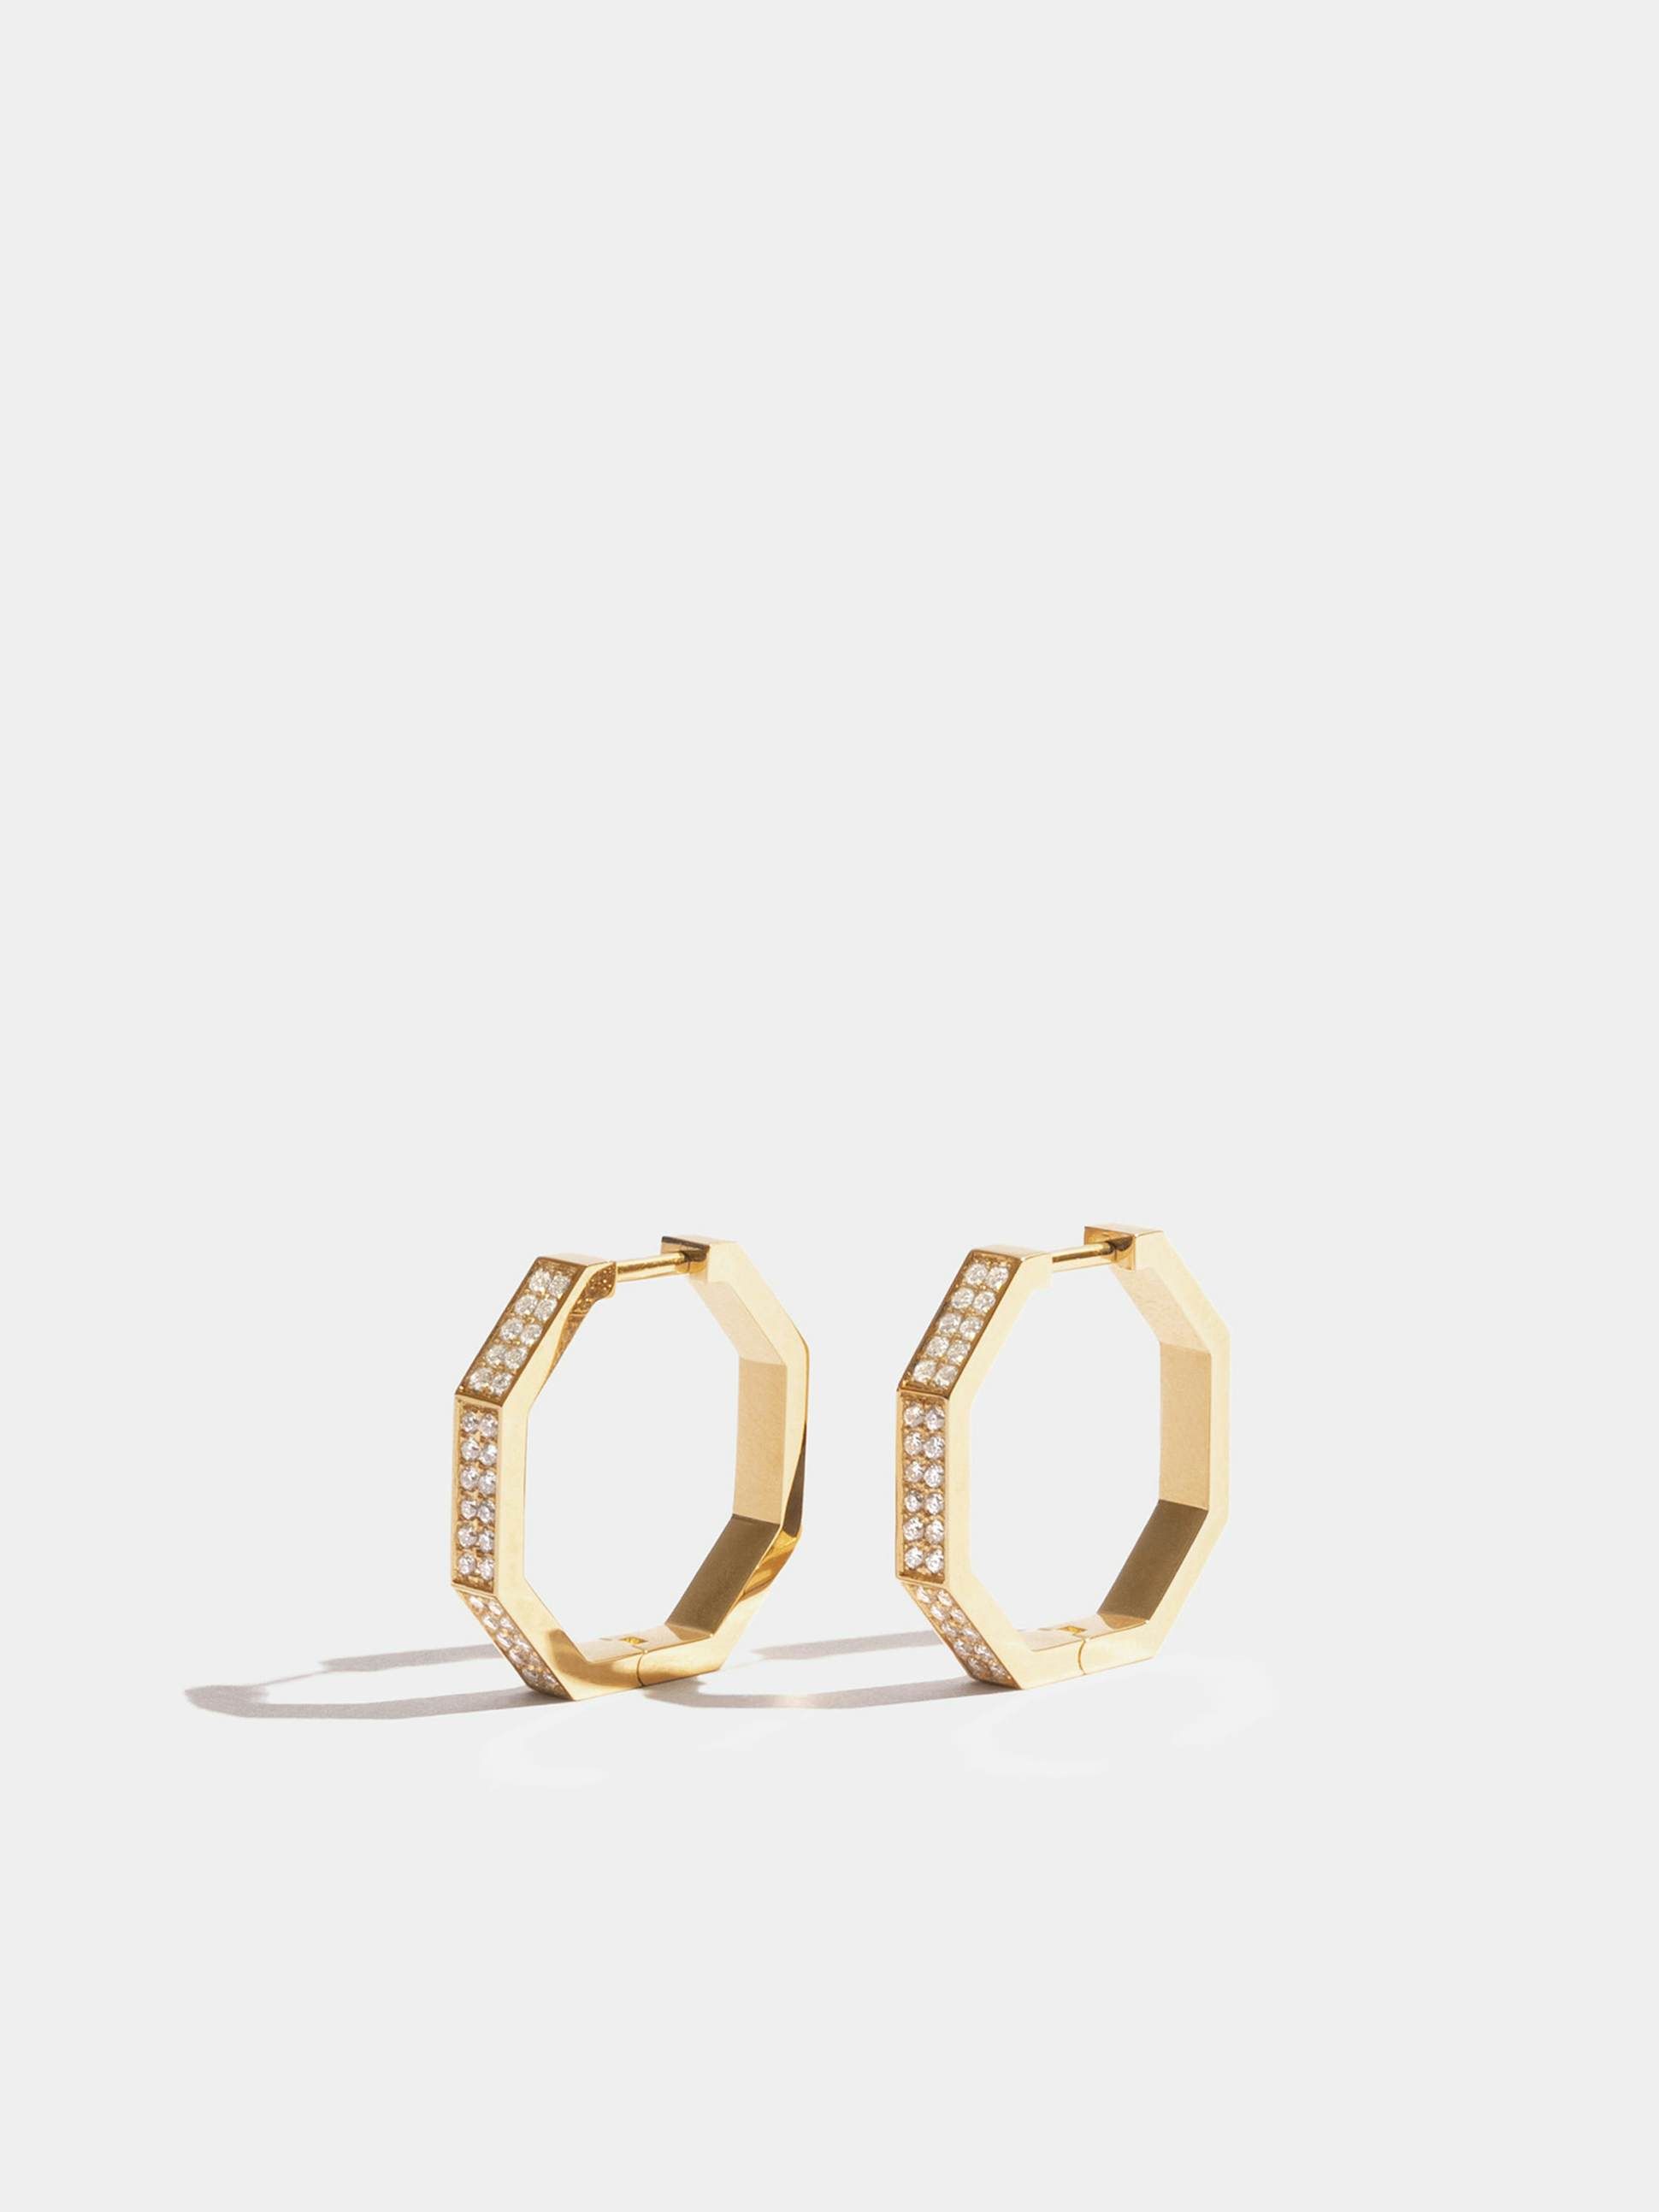 Octogone 18mm earrings in 18k Fairmined ethical yellow gold, paved with lab-grown diamonds, the pair.